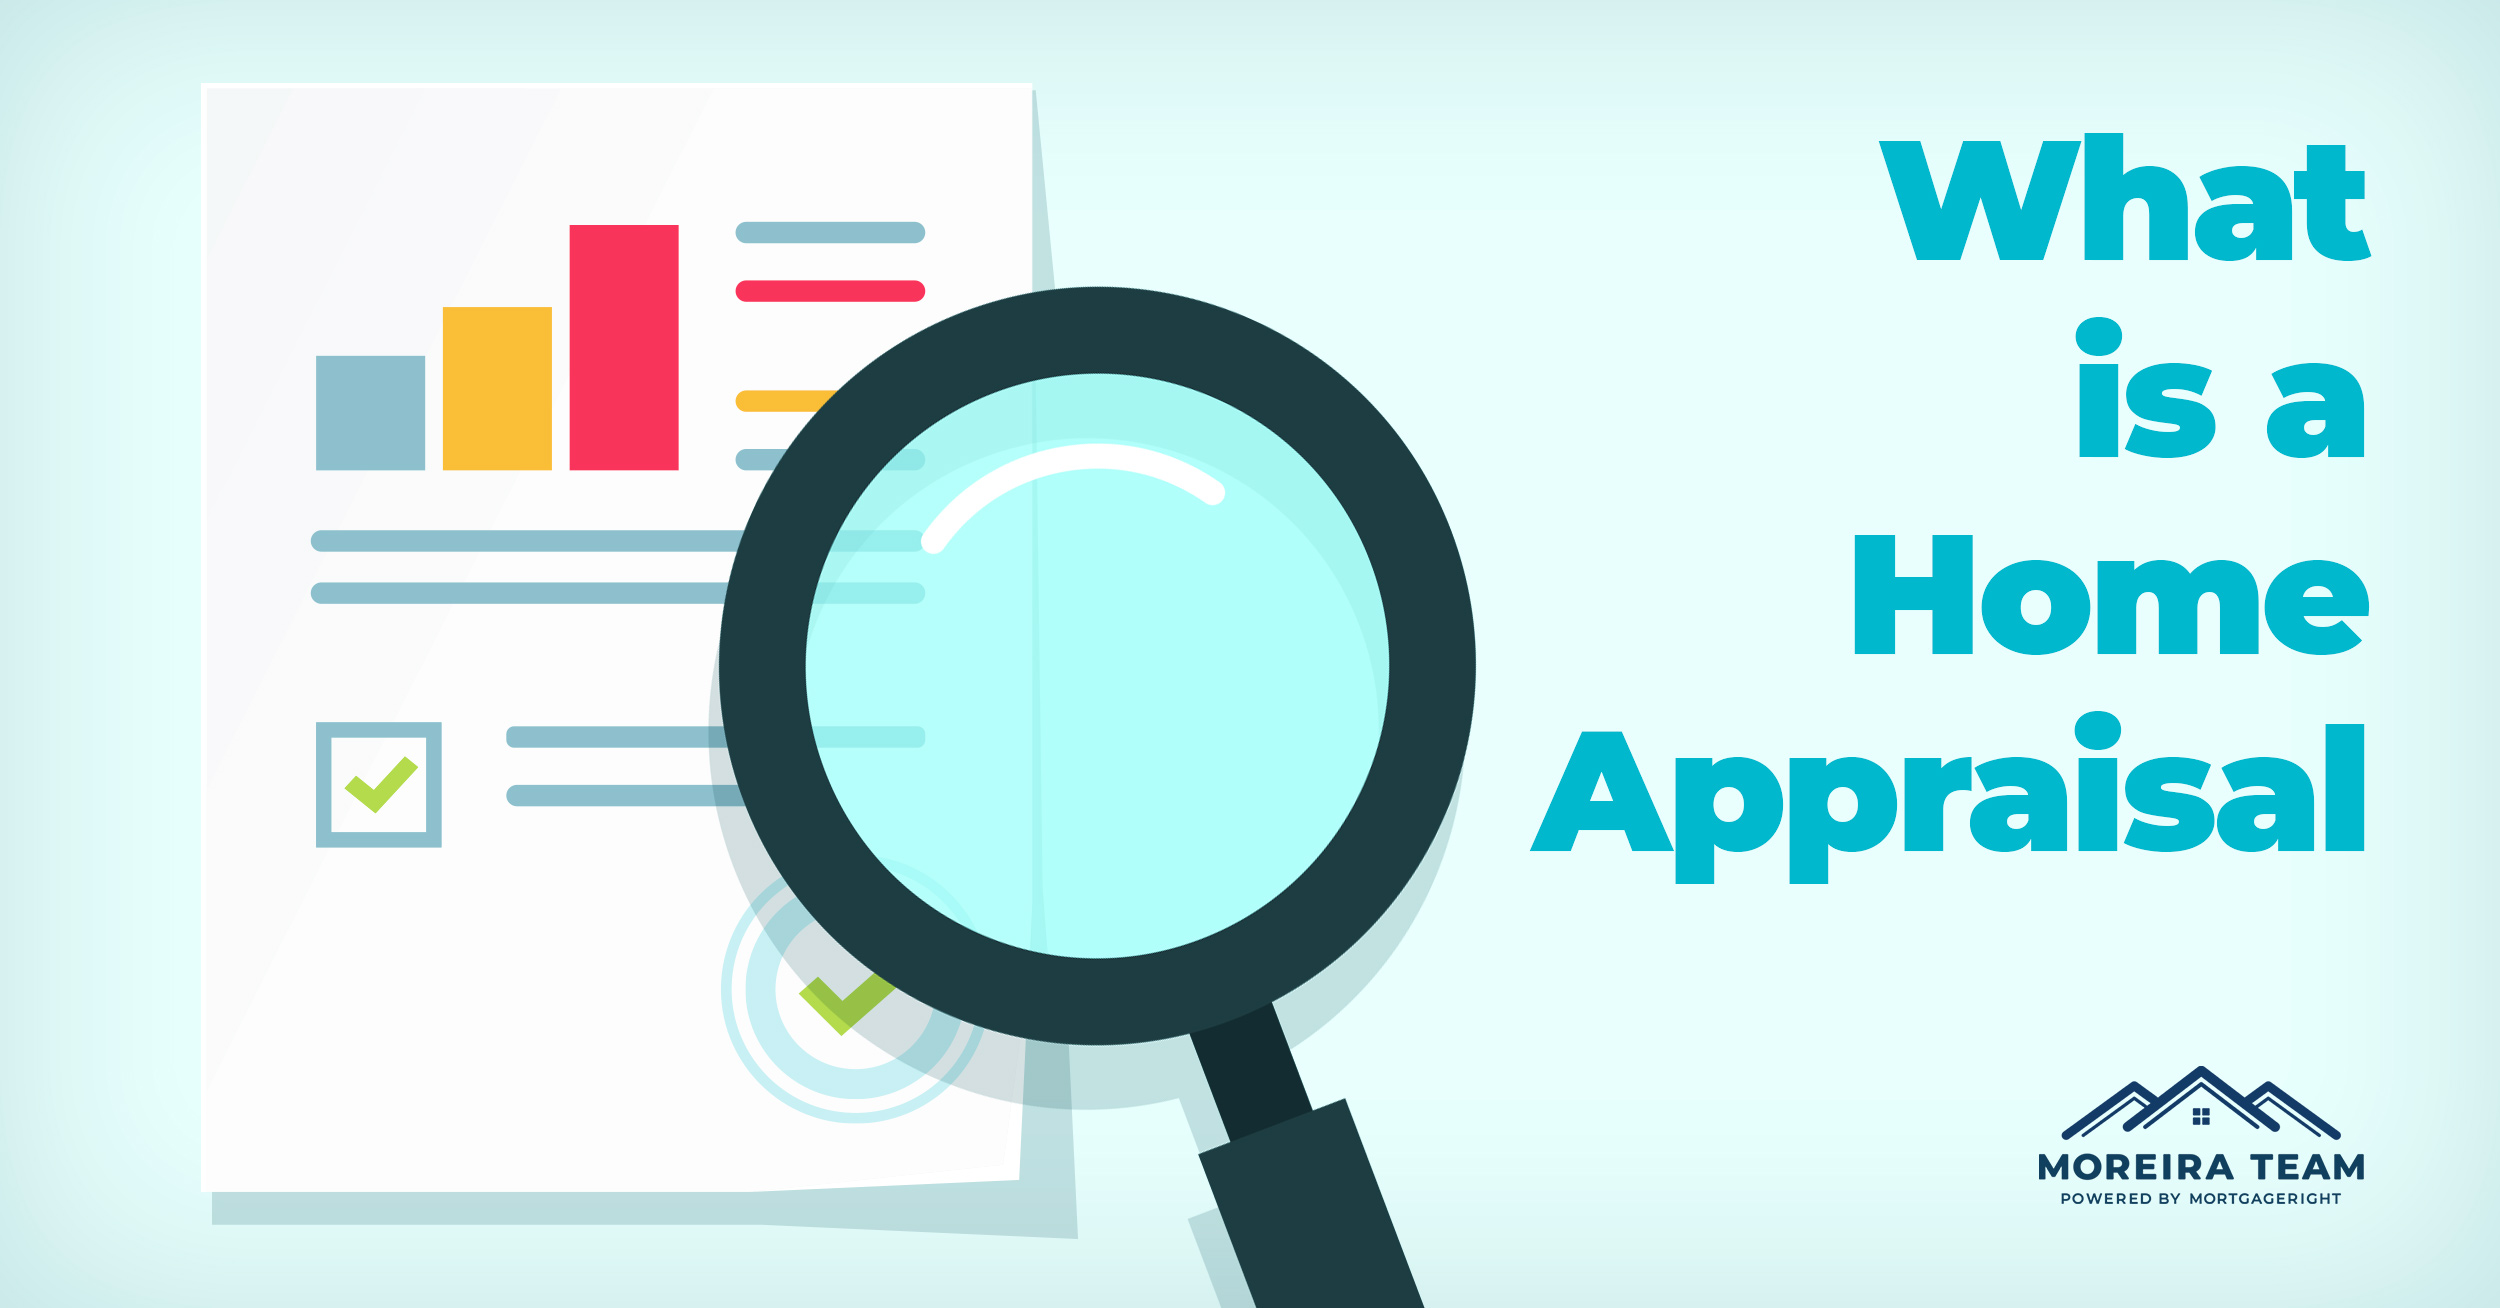 Why do You Need a Home Appraisal?